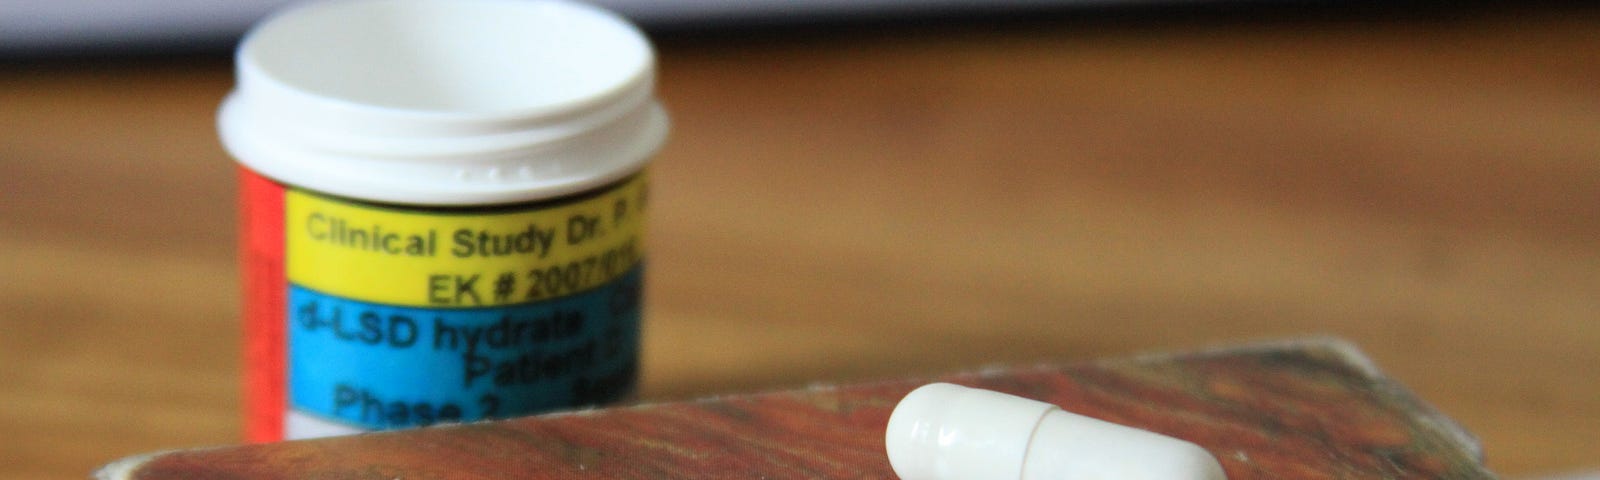 A white pill on top of a wodden box with a prescription bottle behind it. Photo courtesy of the Multidisciplinary Association for Psychedelic Studies